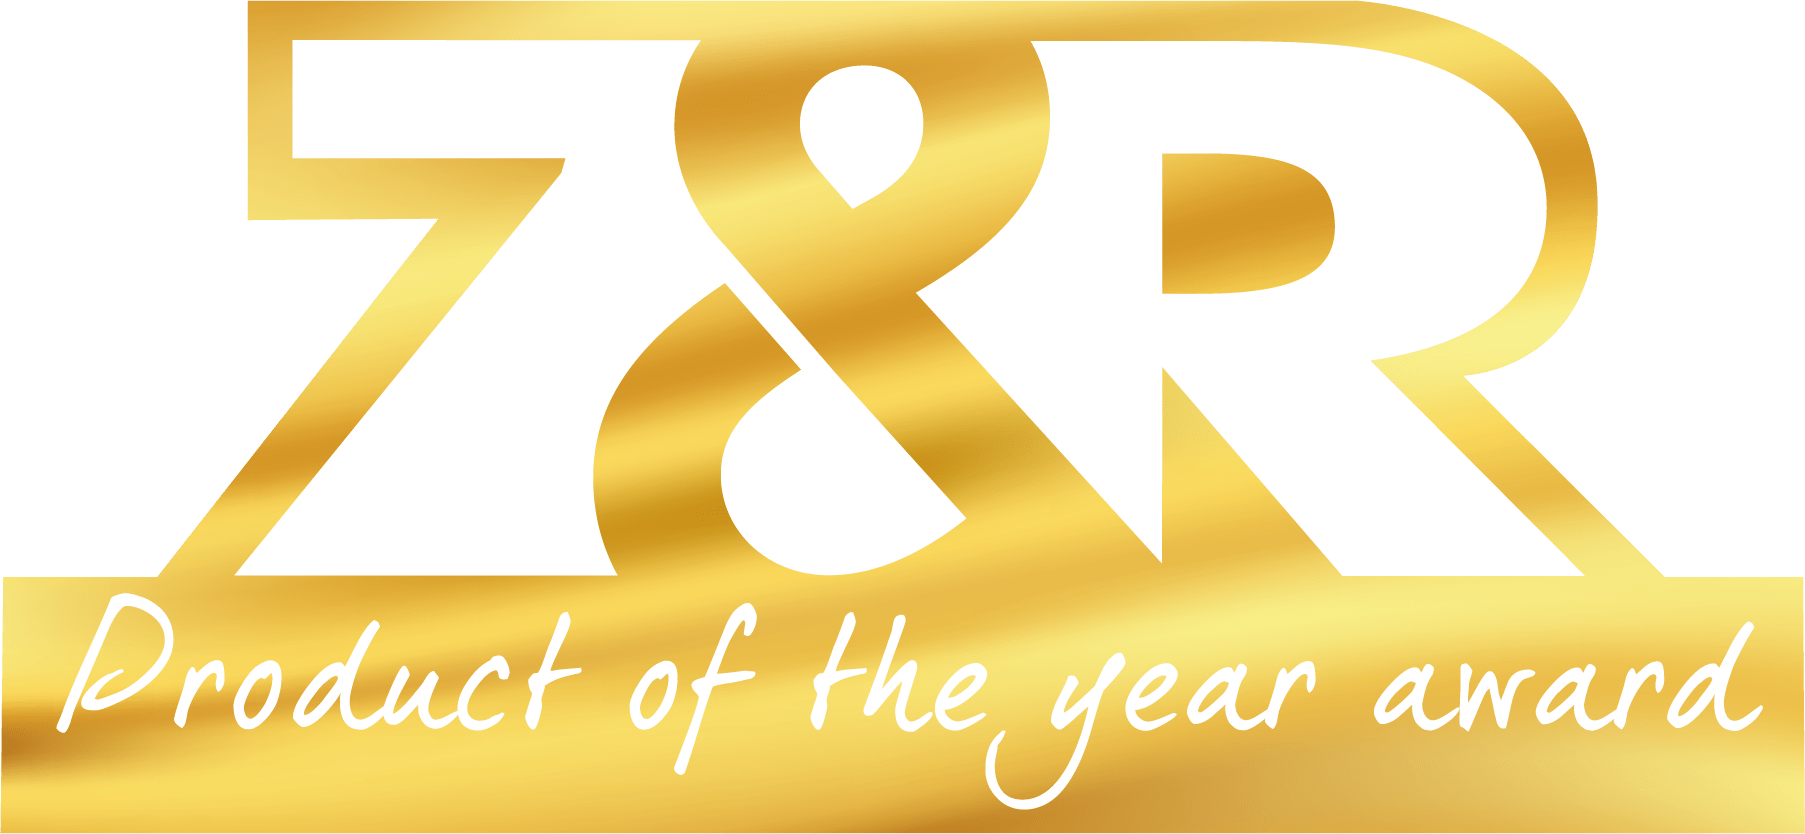 Product of the year awards logo